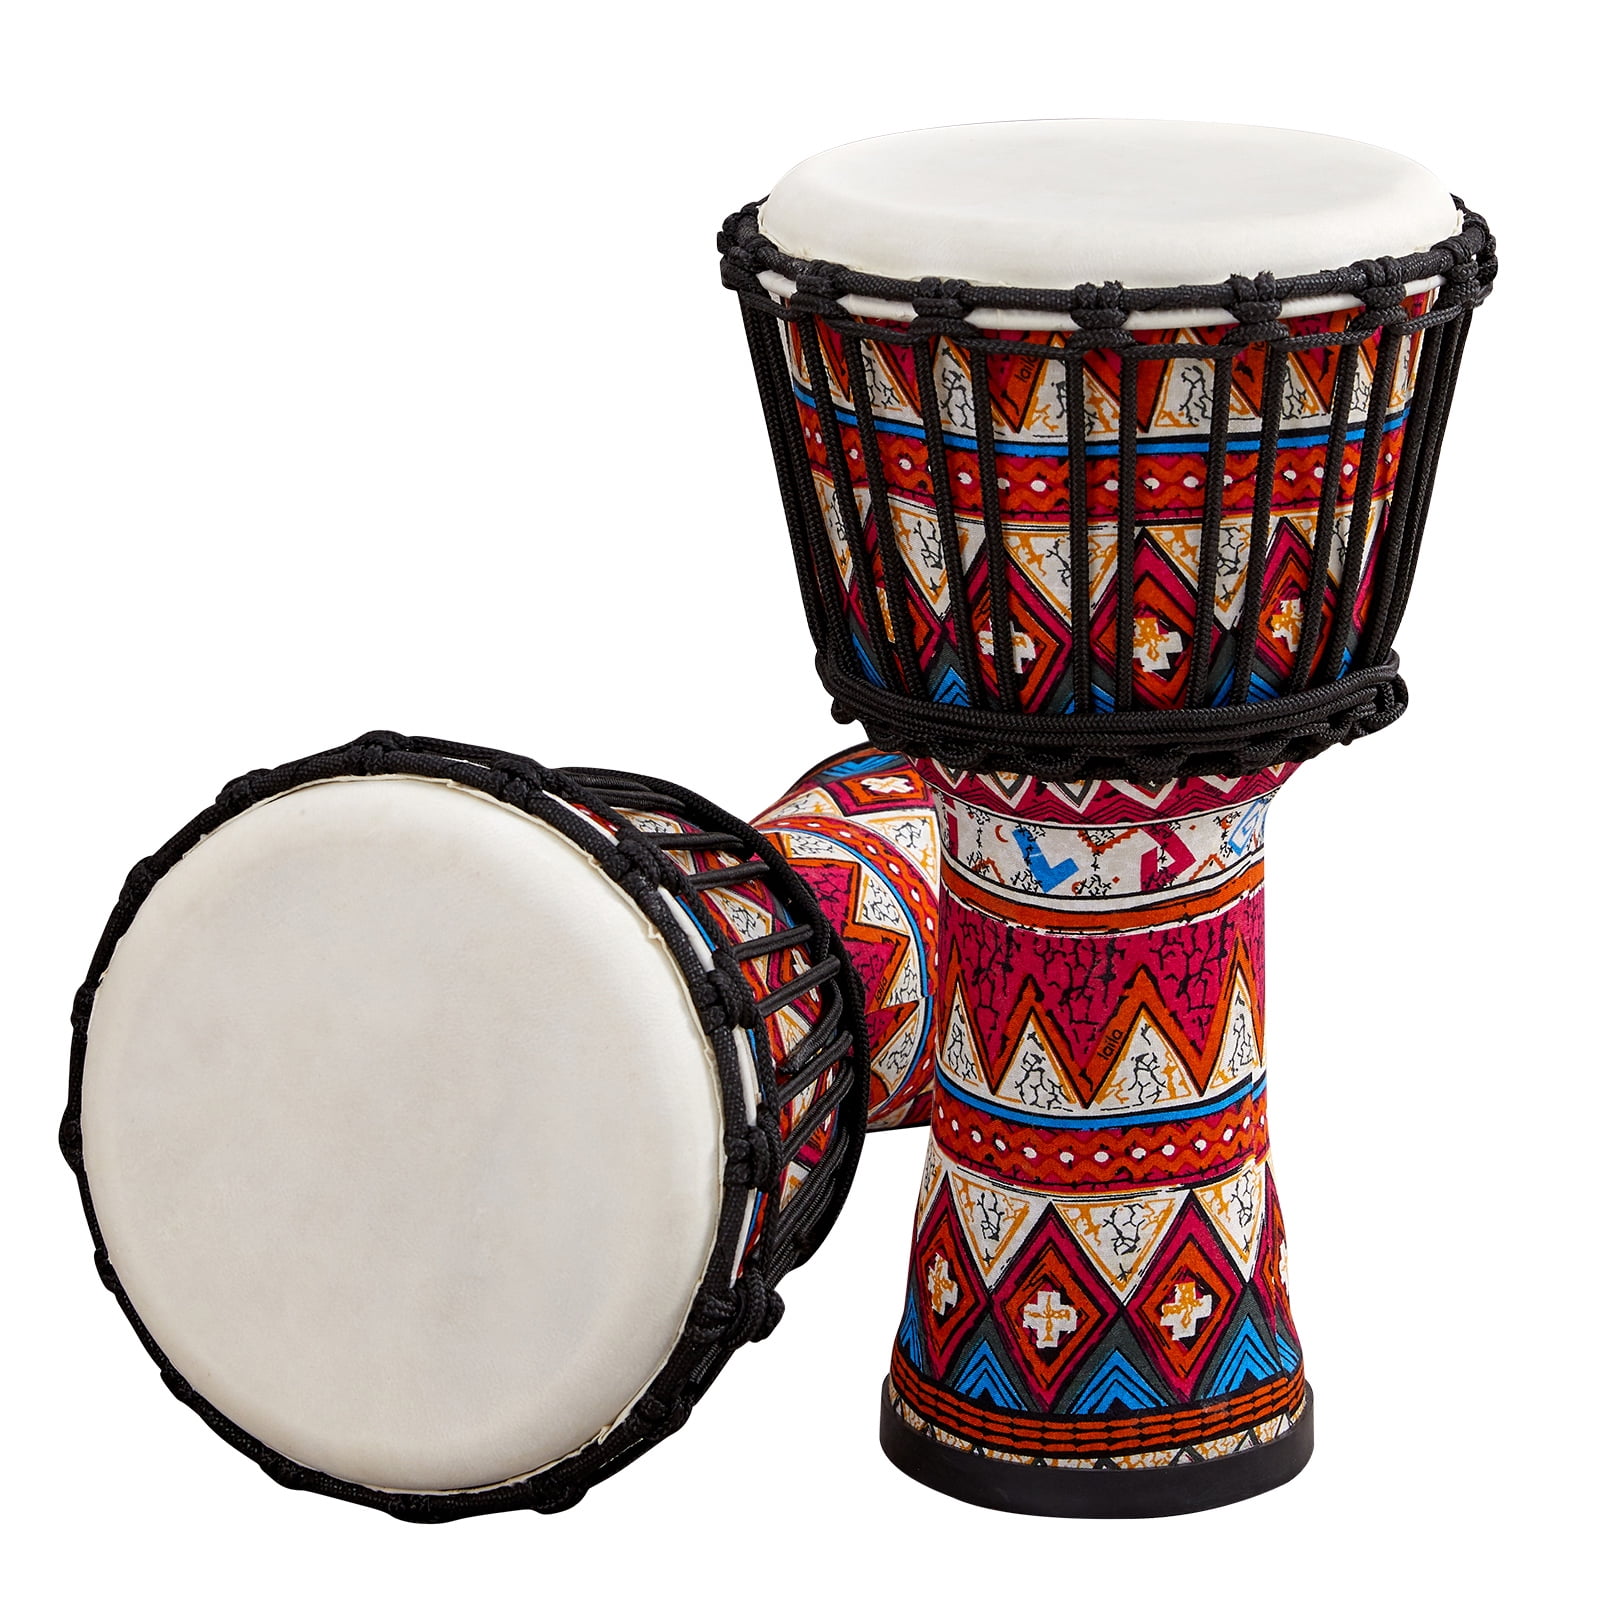  Claves - $50 To $100 / Claves / Latin Hand Percussion  Instruments: Musical Instruments